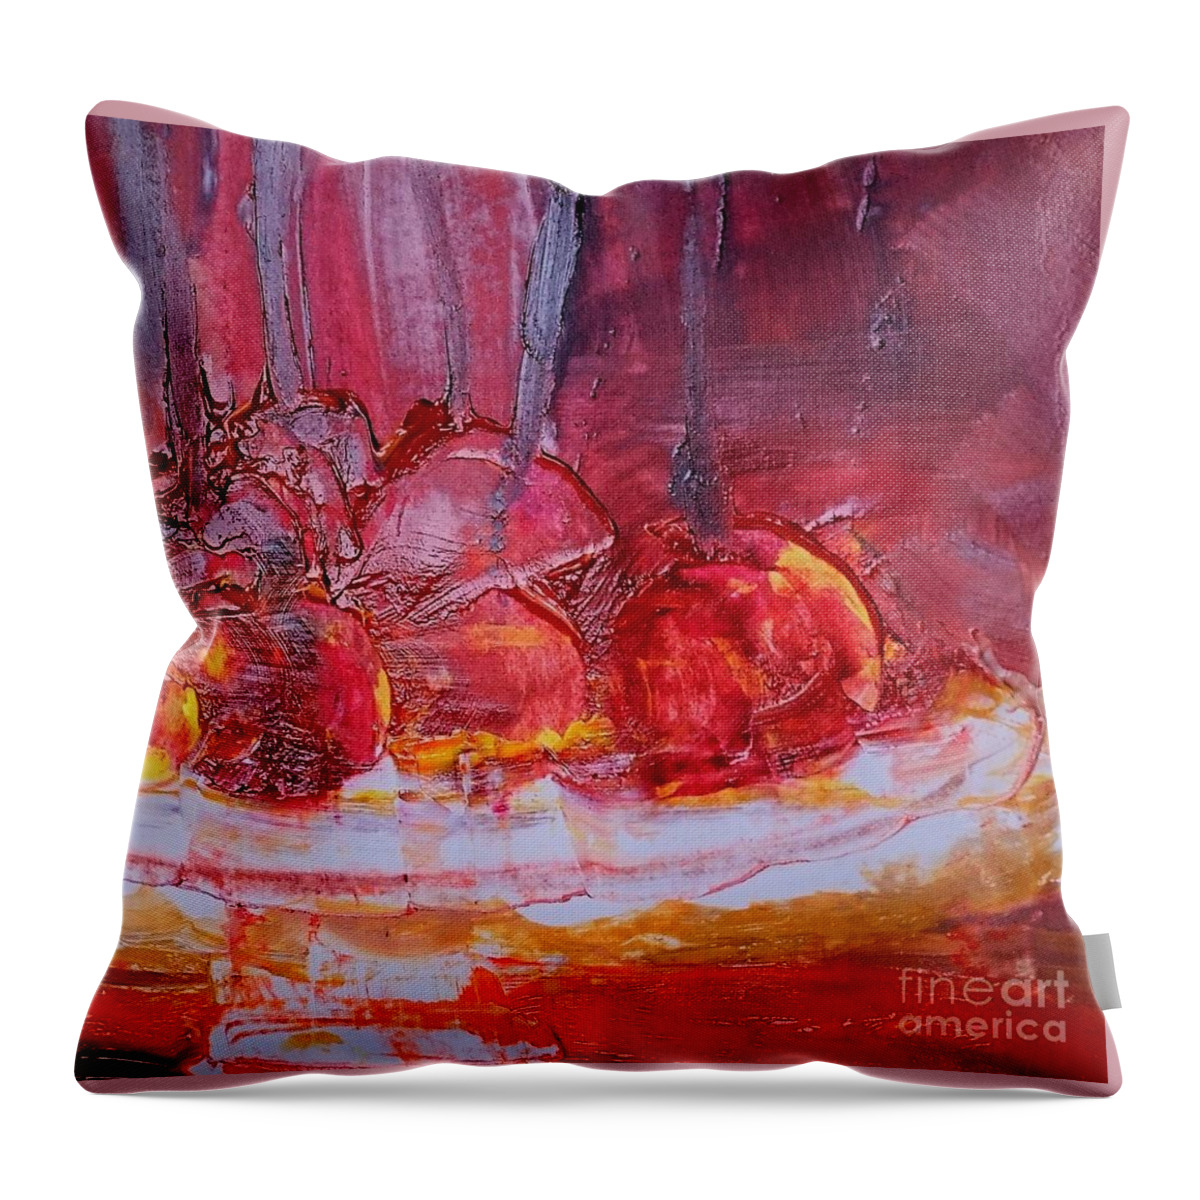 Abstract Throw Pillow featuring the painting Abstract Apples On Cake Plate Painting by Lisa Kaiser